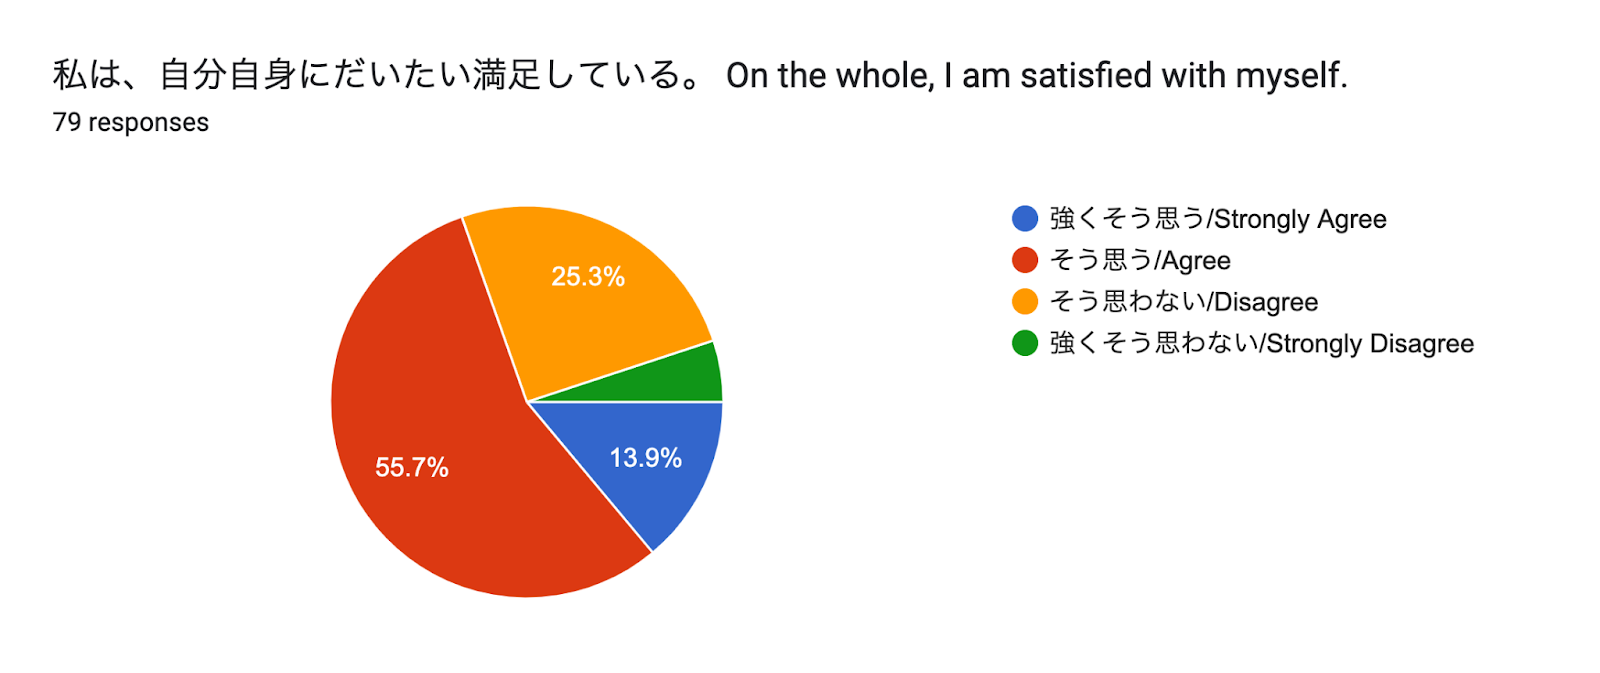 Forms response chart. Question title: 私は、自分自身にだいたい満足している。
On the whole, I am satisfied with myself.. Number of responses: 79 responses.